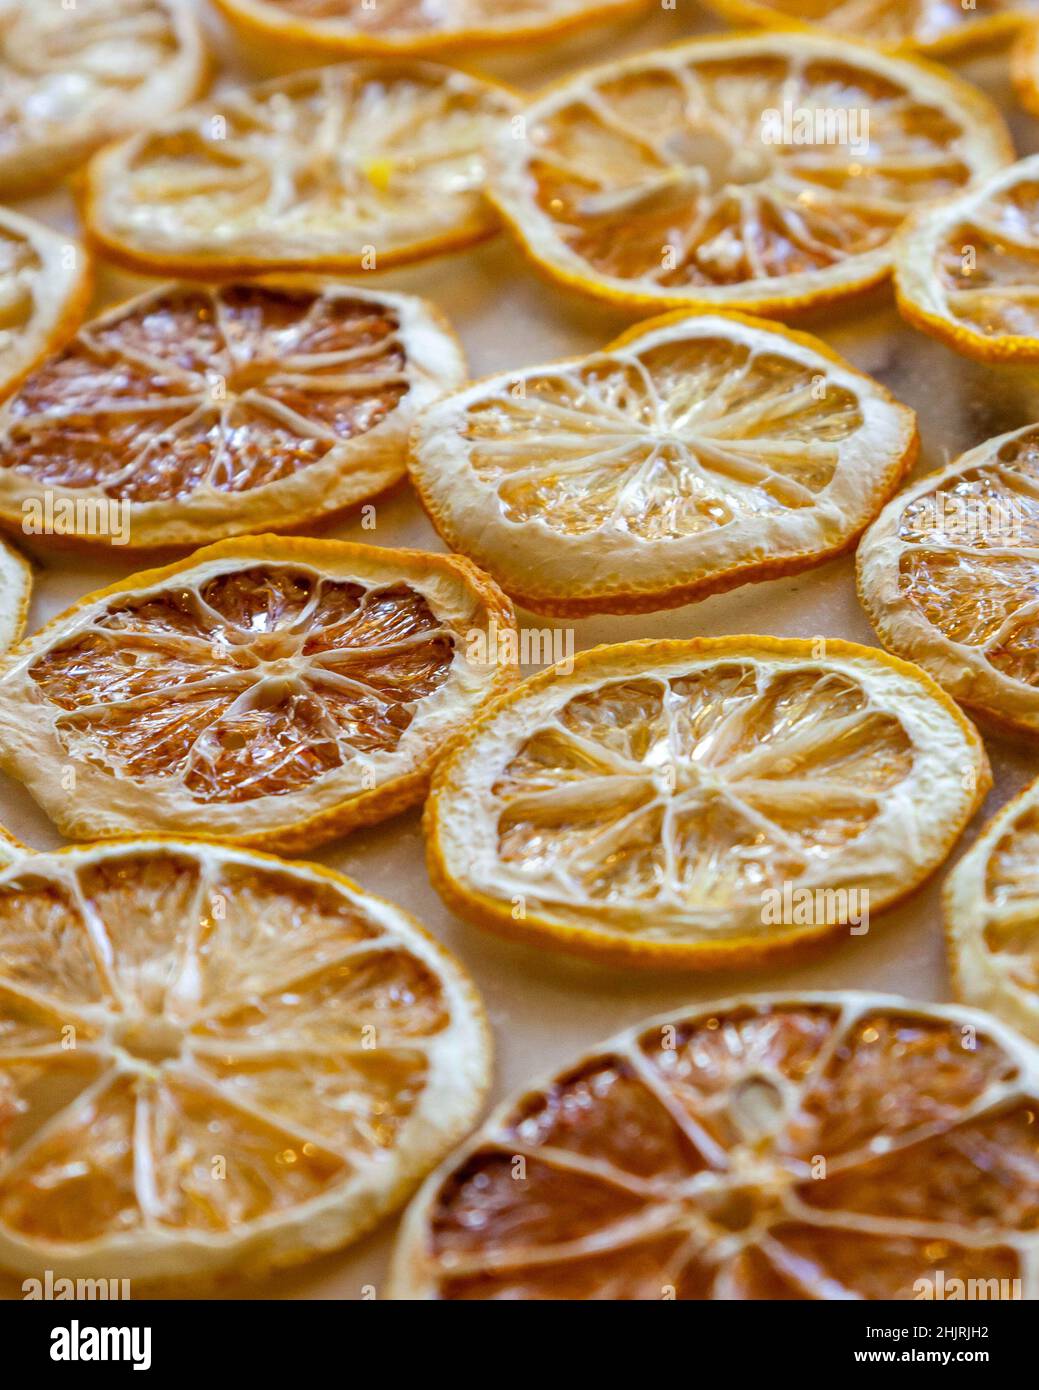 Dried oranges and lemons on a marble counter Stock Photo